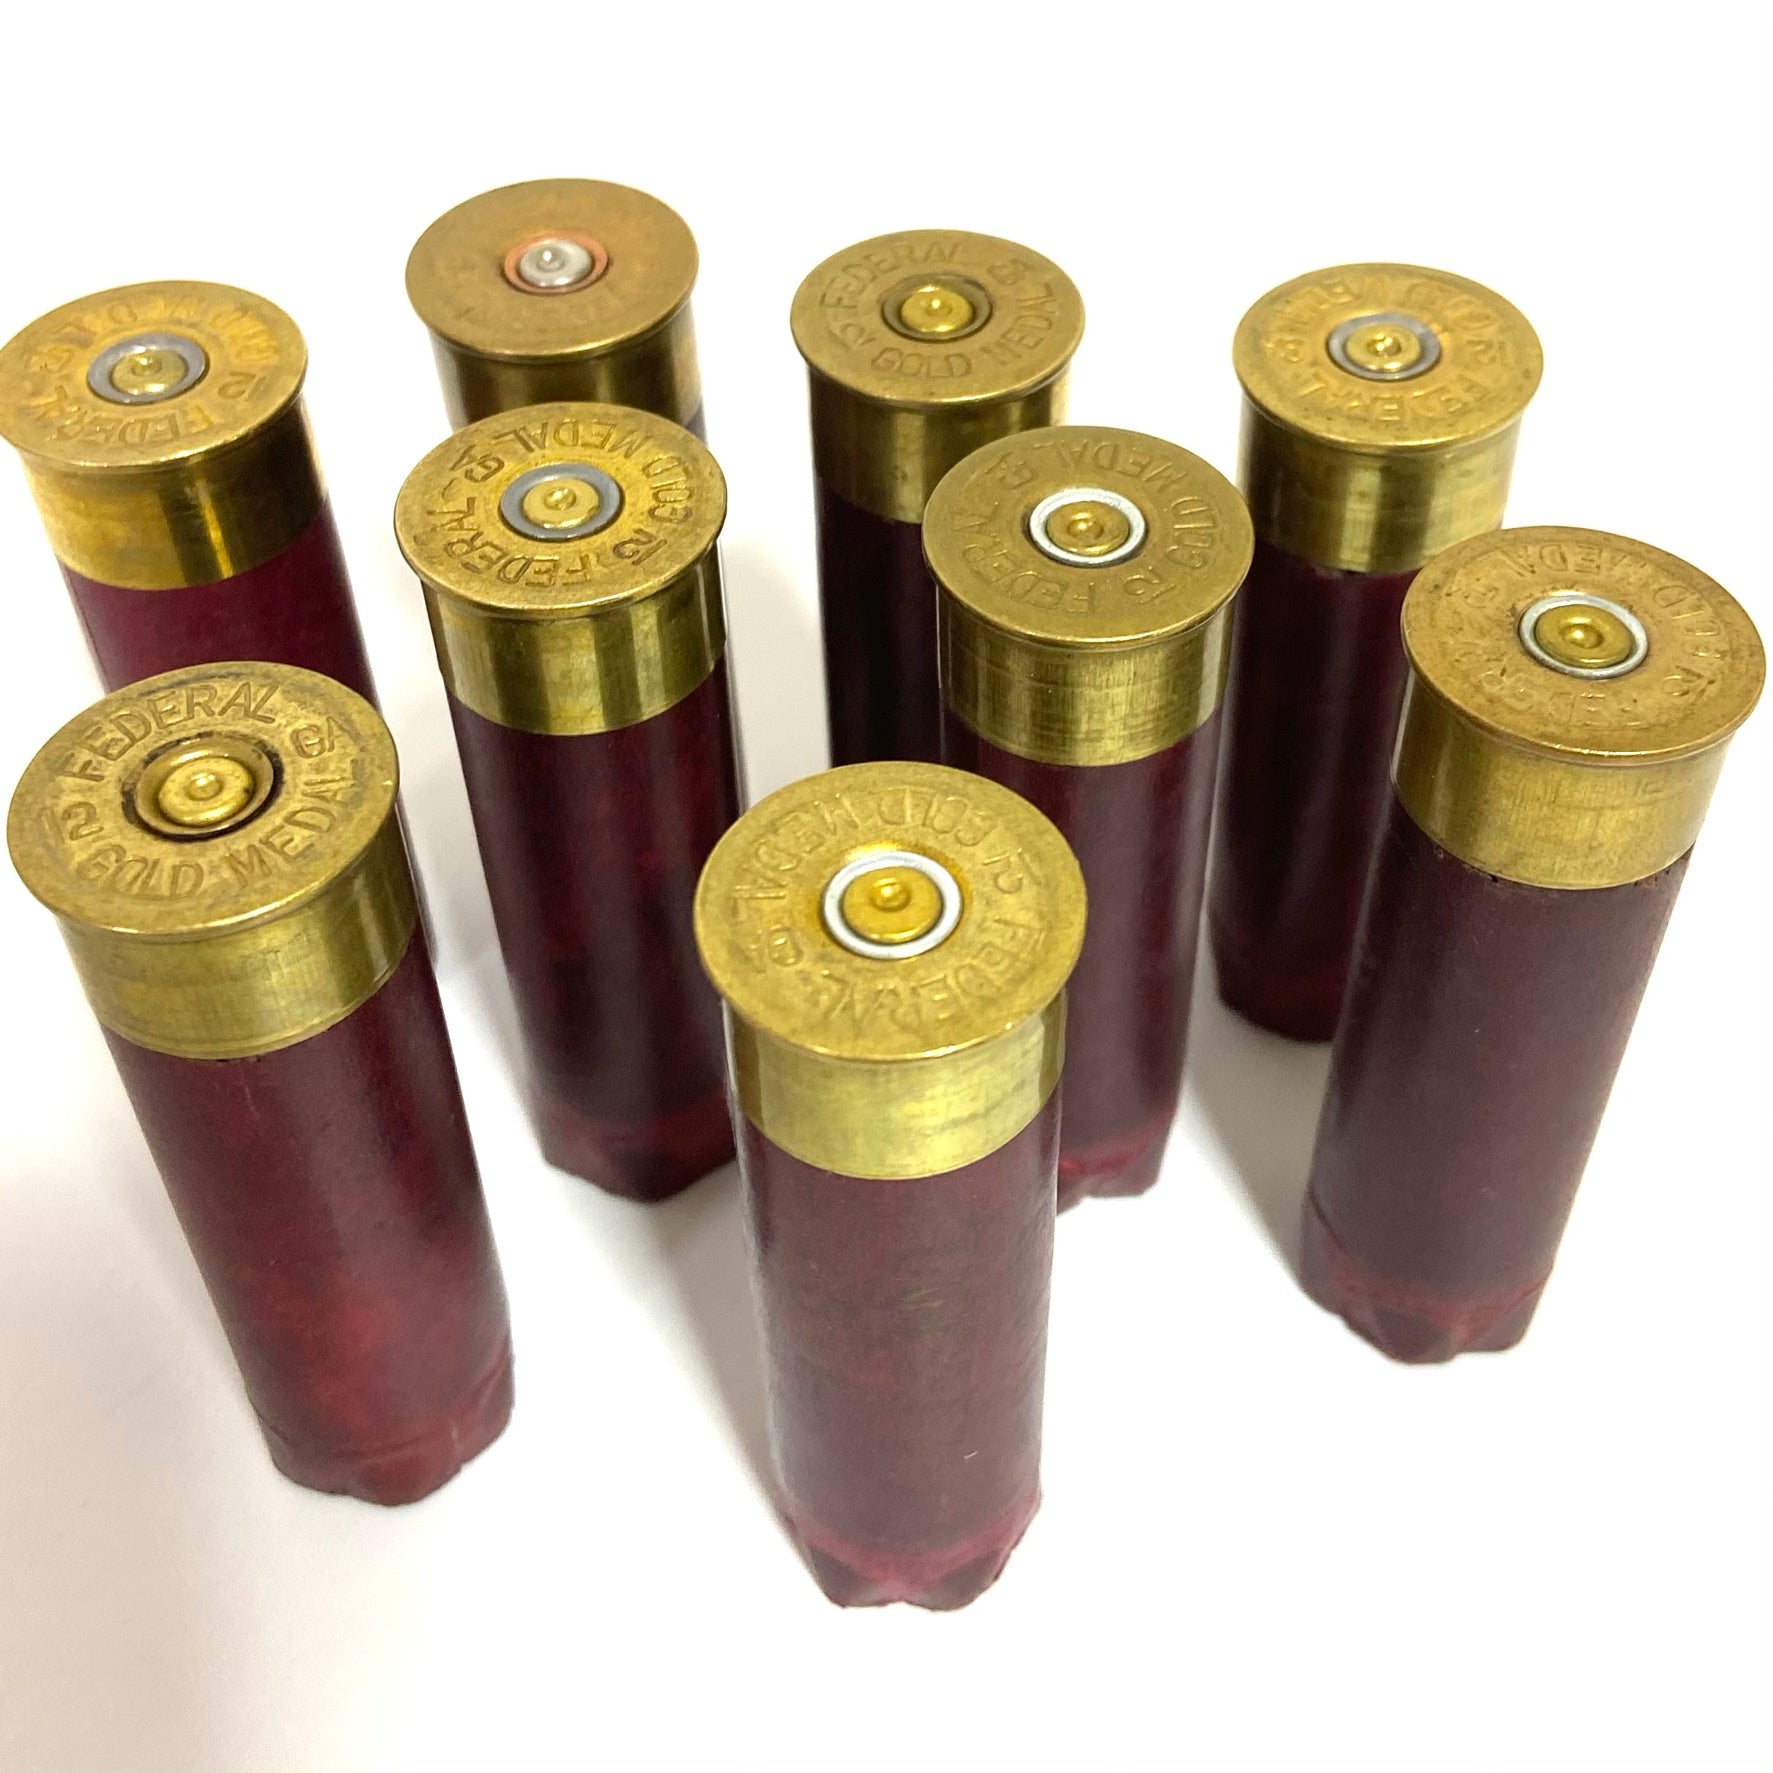 Federal 12 Gauge Gold Medal Shotgun Shell Genuine Brass Button-shotgun  Shell Button bullet Button re-enactor's Buttons-price is per Button 